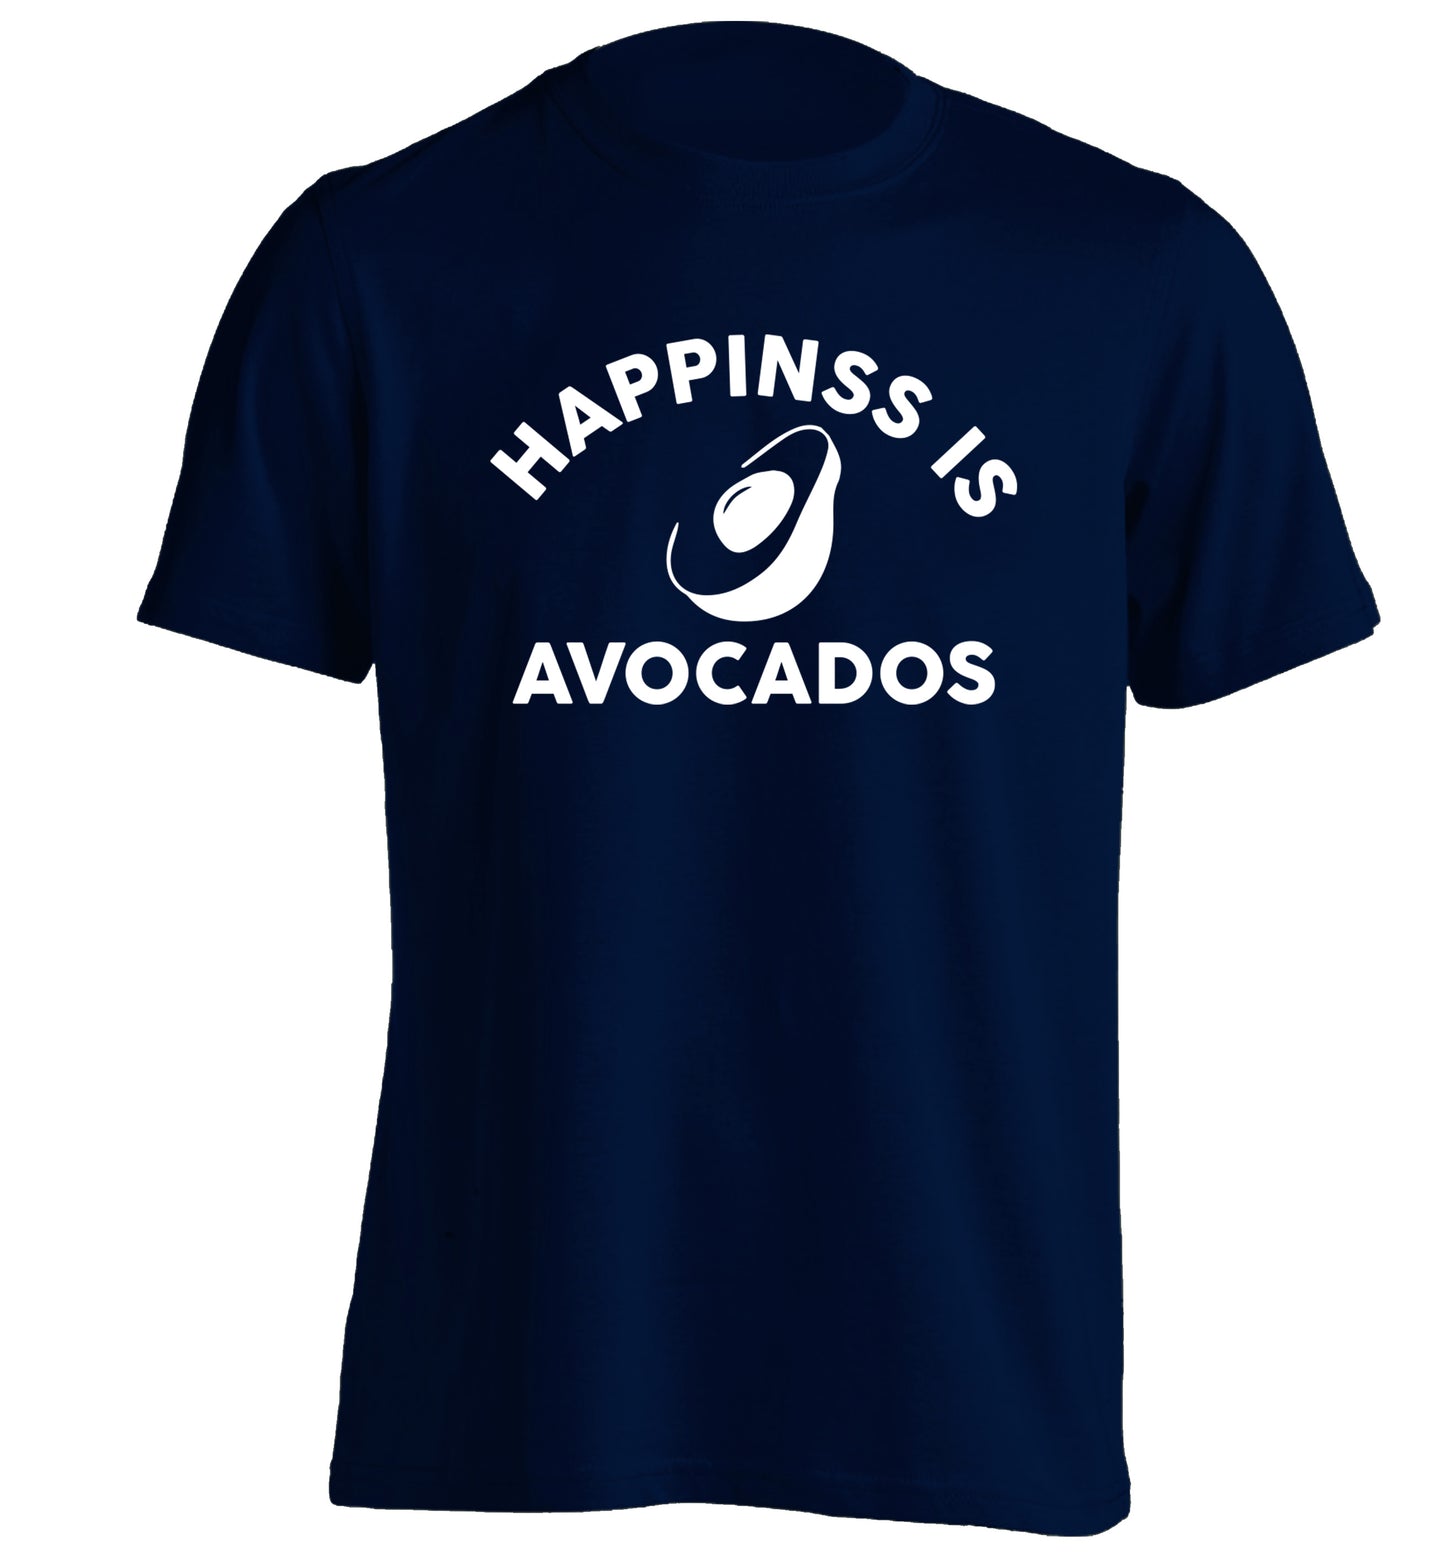 Happiness is avocados adults unisex navy Tshirt 2XL